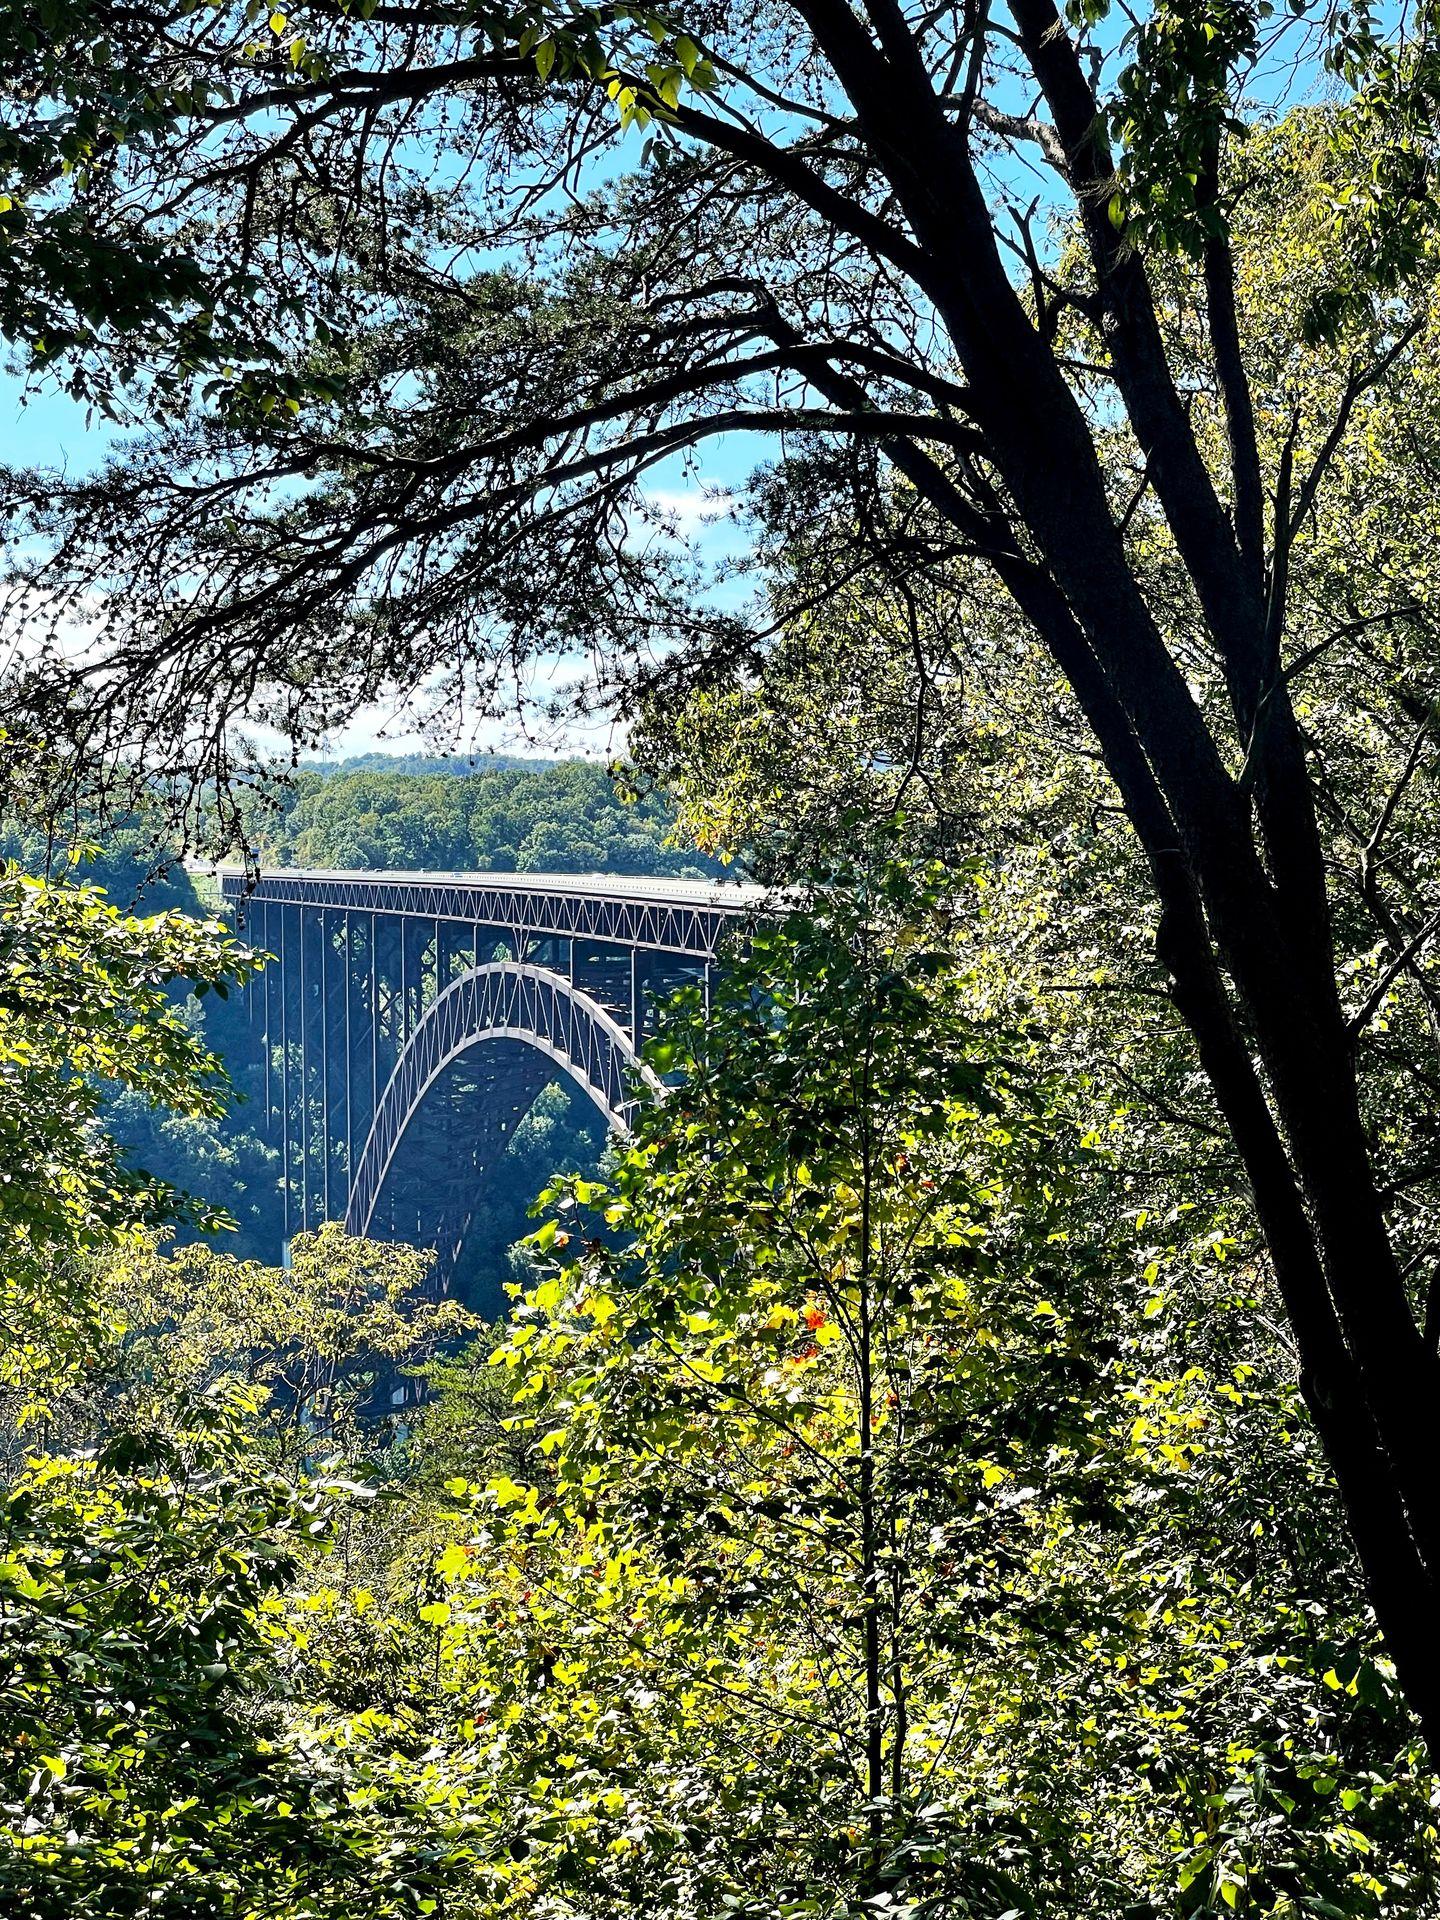 The New River Gorge Bridge between several trees.